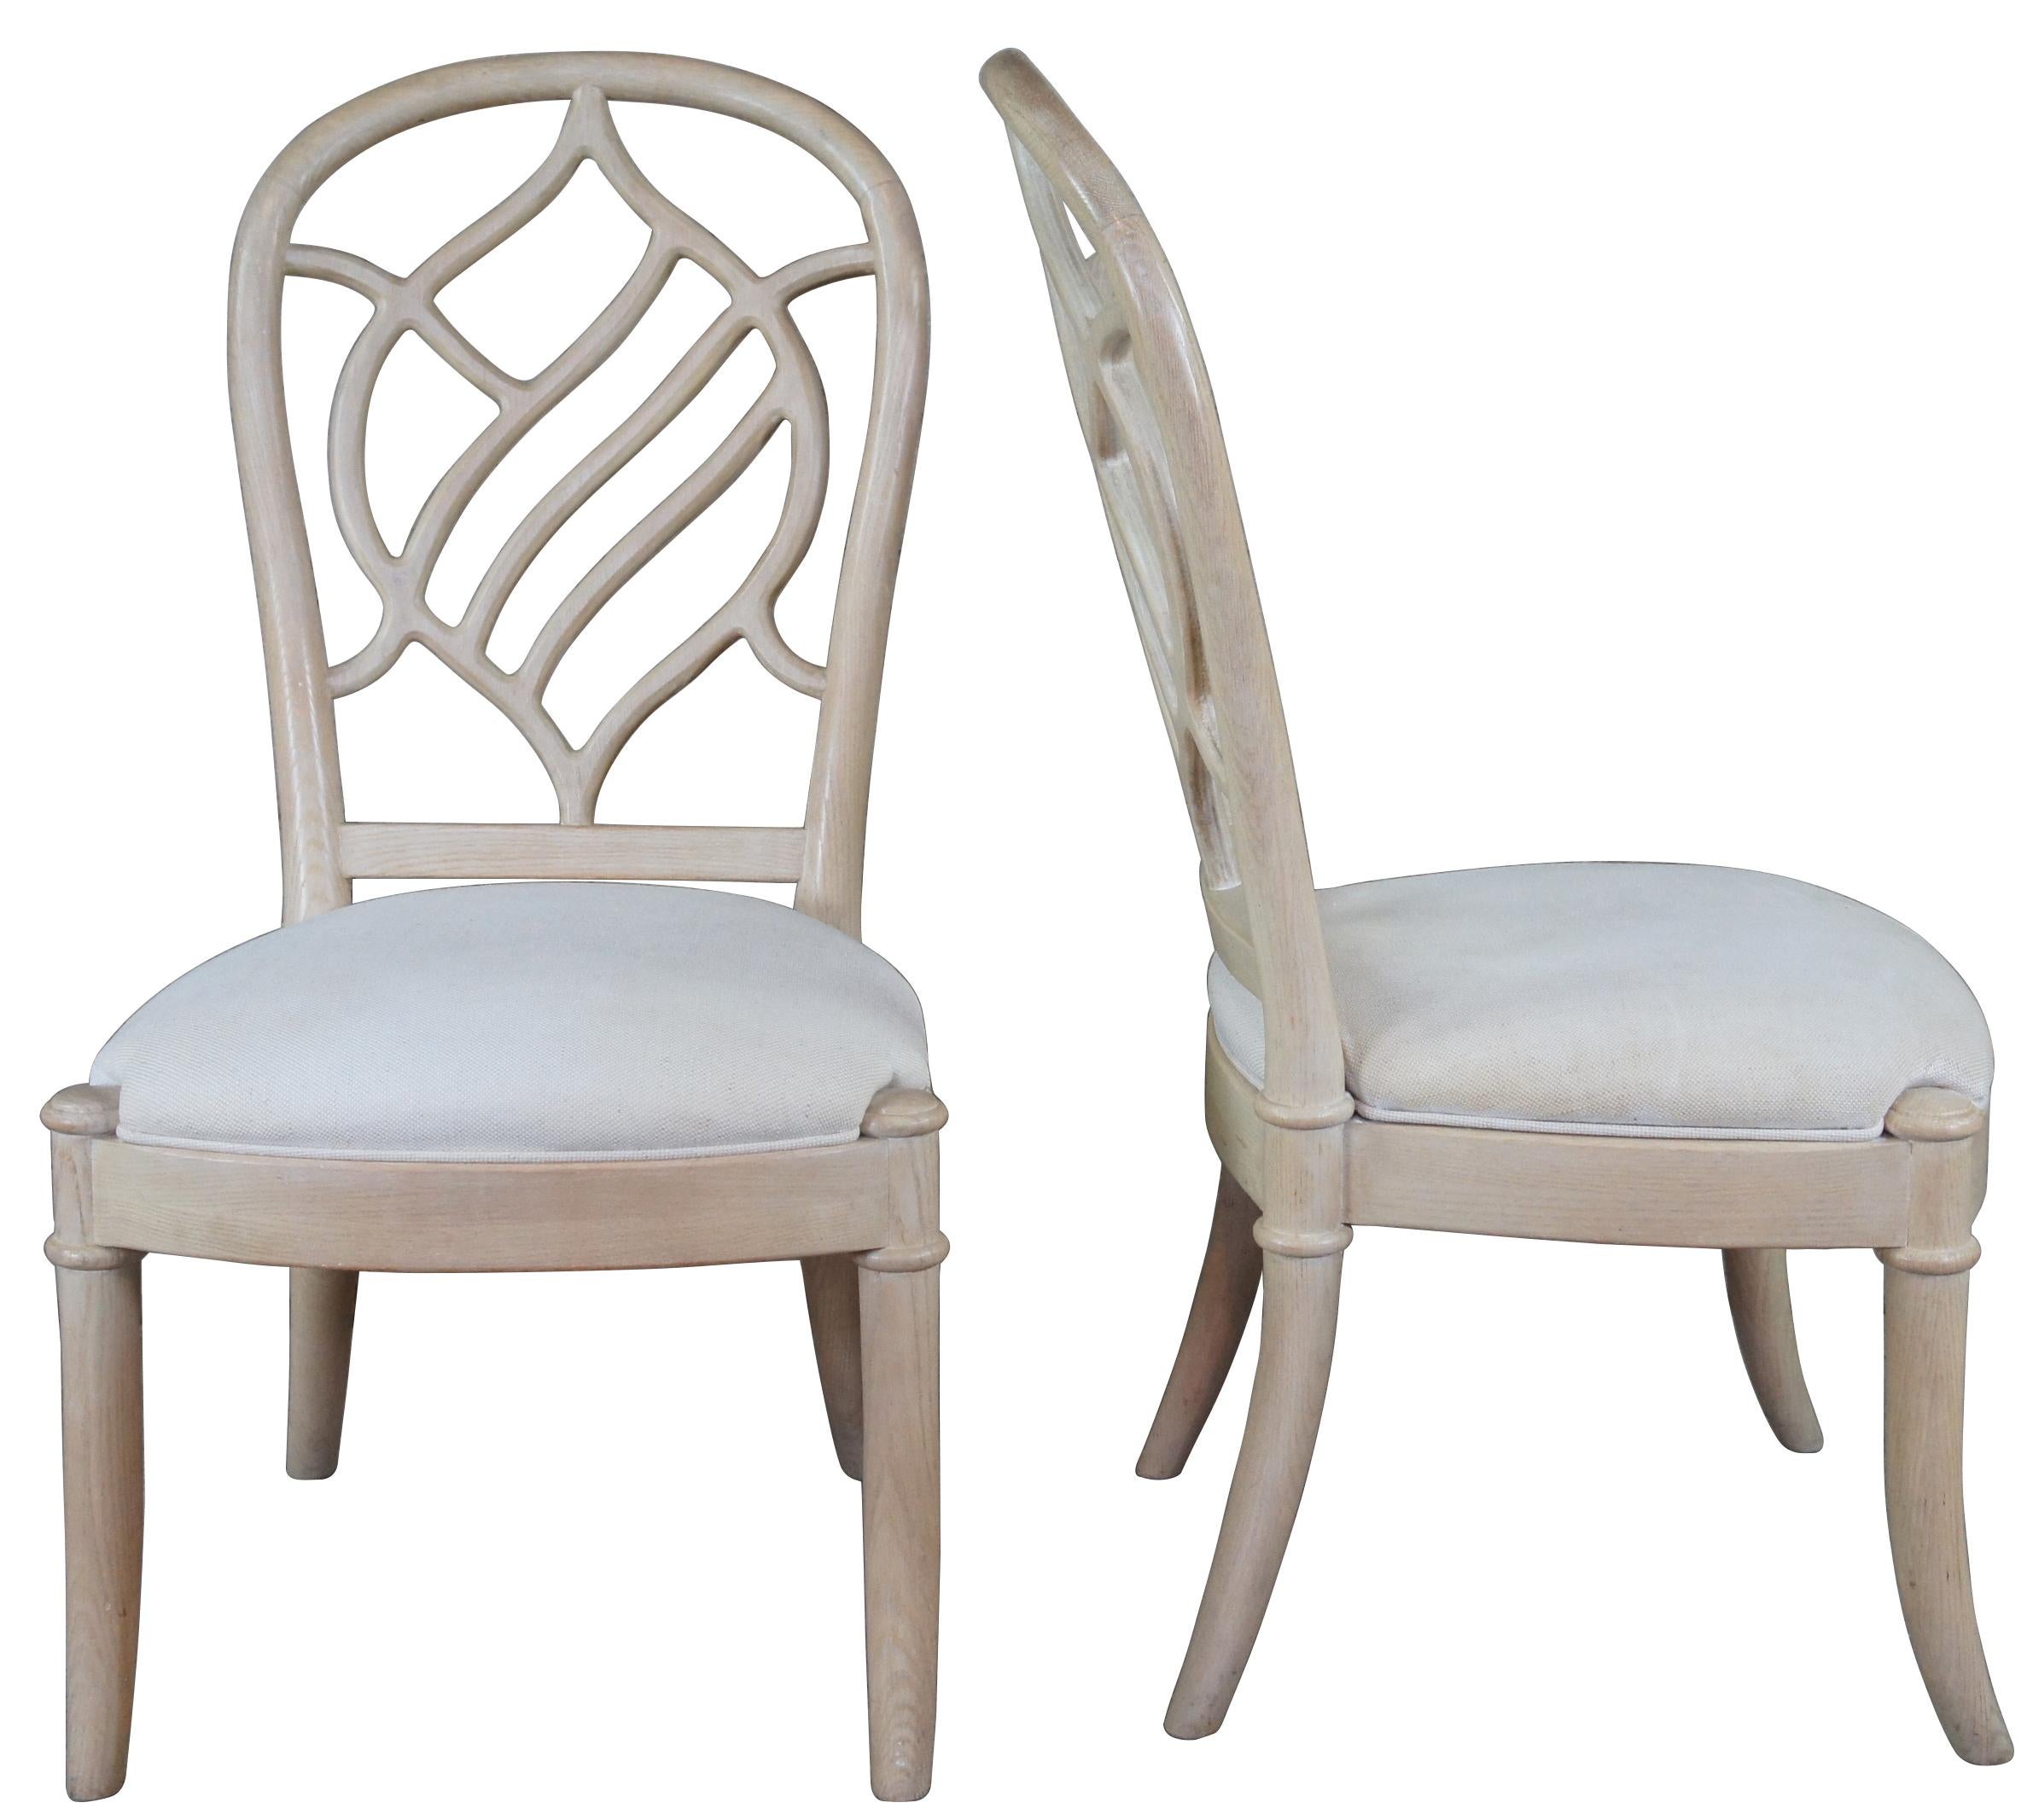 Four vintage Henredon side chairs. Made of pickled oak featuring a sculpted leaf shaped back and upholstered seat.
 